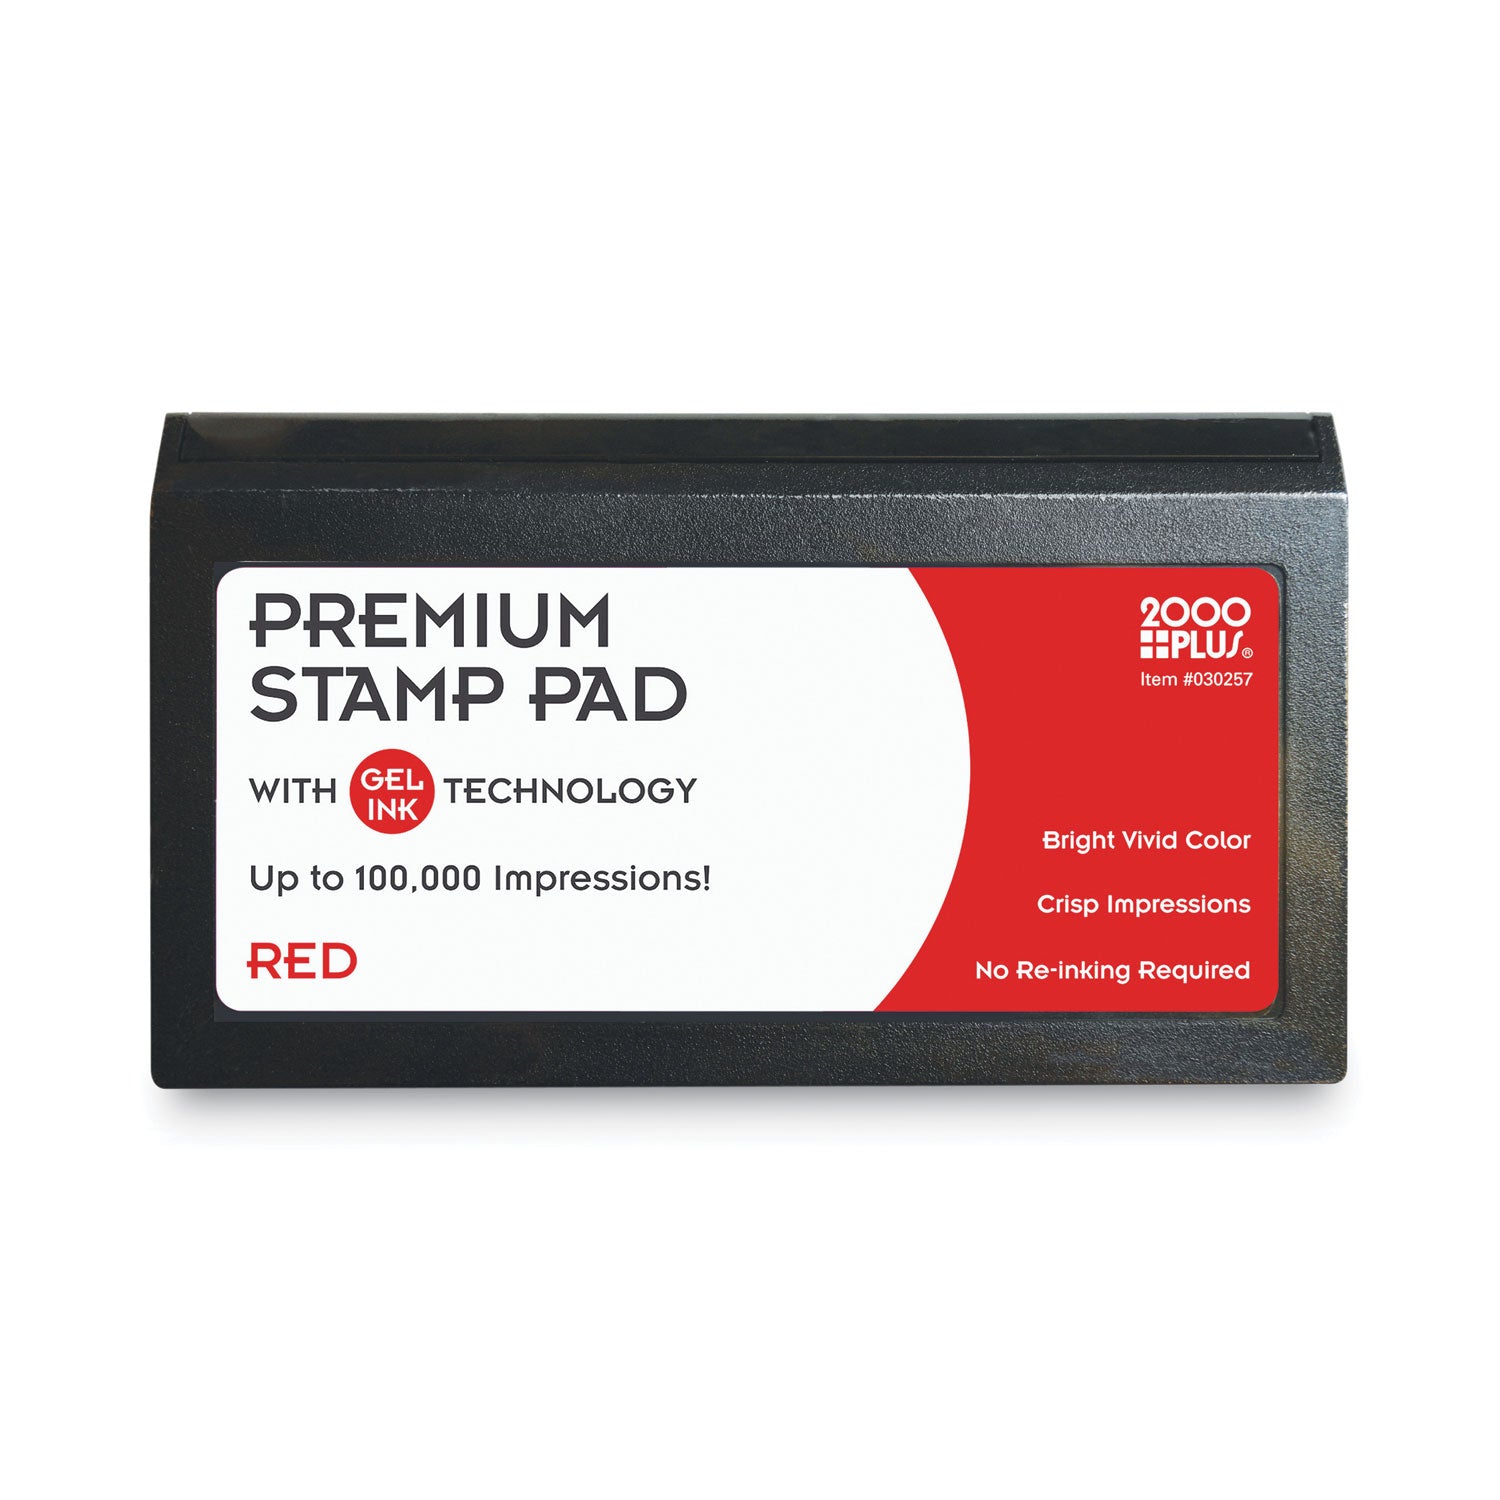 Microgel Stamp Pad for 2000 PLUS, 6.17" x 3.13", Red - 